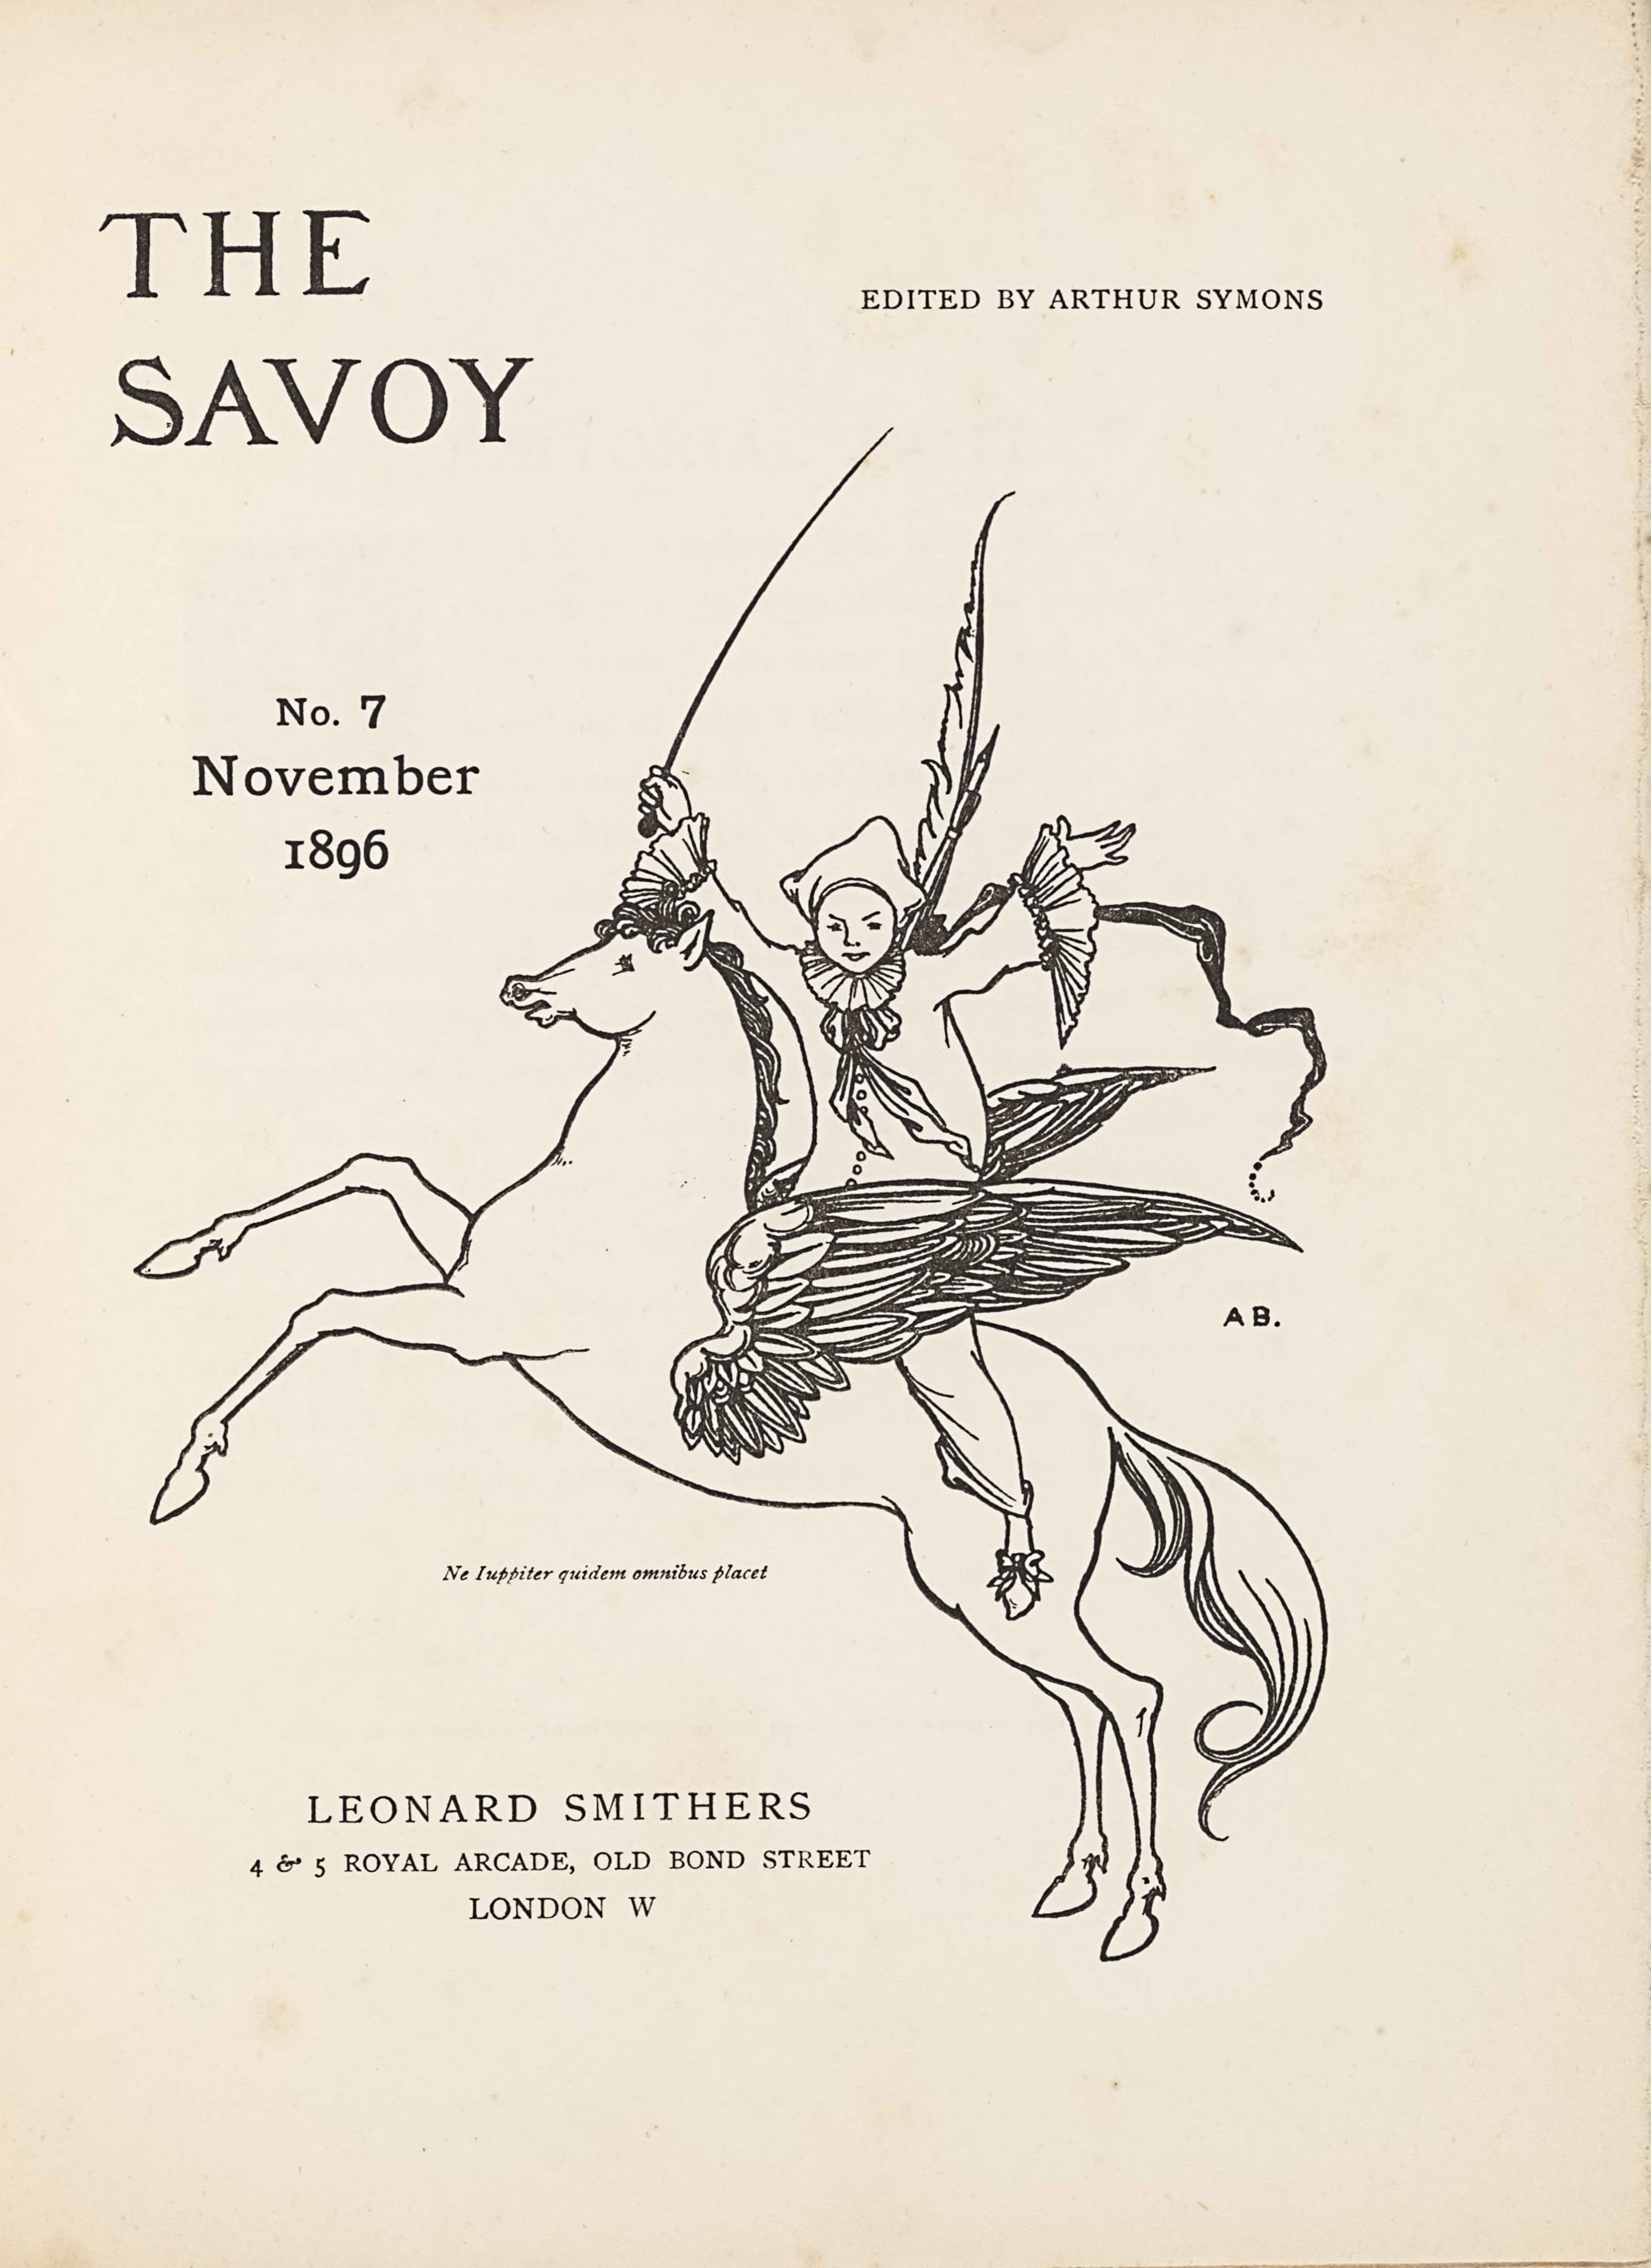 The unframed title page, in portrait orientation, combines a line-block reproduction of a pen-and-ink design with letterpress. The image shows one figure [a Pierrot] riding a winged horse [a Pegasus] in the centre of the page with publishing information printed in the surrounding area. In the upper left corner is the text: “THE” [large caps] and one line below the text: “SAVOY” [large caps]. These two lines of text are left-aligned and indicate the title: “THE SAVOY” [caps]. To the right side of the page and appearing in line with the centre of the title text is the editing information: “EDITED BY ARTHUR SYMONS” [small caps]. Below the title on the left side of the page, still in about the top third, is the text: “No. 3”, and below that the text: “July”, and below that line: “1896”. These three lines are centred with each other. To the right of this text is the image of the figure on the horse. The horse and figure are facing towards the left; the horse is in profile and the figure is turned to face the viewer. The horse is rearing, with both front legs lifted up into the air. The horse spans the width of the page and is about half of the page height. The horse has a long tail trailing behind. The horse’s mouth is slightly opened and the pointed ears are pulled back. The mane is curled and a few pieces fall forwards toward the eyes. The horse has large wings emerging from the sides of its ribcage. The wings are made up of many feathers of various sizes and are formed like eagle wings, with a smaller section on the bottom half and a larger pointed portion of the wing on the top half. Between the wings sits a male figure dressed like a Pierrot or clown. The figure has his upper body turned to face the viewer, with both arms opened wide and lifted up into the air. He is wearing slippers with a bow on the toe, baggy pants that fall just above the ankle, and a baggy shirt that has buttons up the front. The shirt has large ruffles on the sleeve hems and a large ruffle around the figure’s neck, finished with a ruff and flowing, loosely tied bow. He is wearing a white three-cornered hat. The figure has a long whip in his right hand that extends high above him. A feather pen and paintbrush extend over his shoulder behind his back, and a banner or pennant flows behind him. To the right of the centre of the horse and figure, just below the right wing tip, is the small text: “A B.” [caps]. A Latin epigraph appears just below the belly of the horse, very small and italicized, which reads: “Ne luppiter quidem omnibus placet” [Not even Jupiter can please everyone]. Centred below are the three final lines of text. The first line, and largest sized text of the three, reads: “LEONARD SMITHERS” [caps]. The second line reads: “ARUNDEL STREET, STRAND” [caps]. The third and final line centred below is the mid-size between the above two lines, and it reads: “LONDON W.C.” [caps].